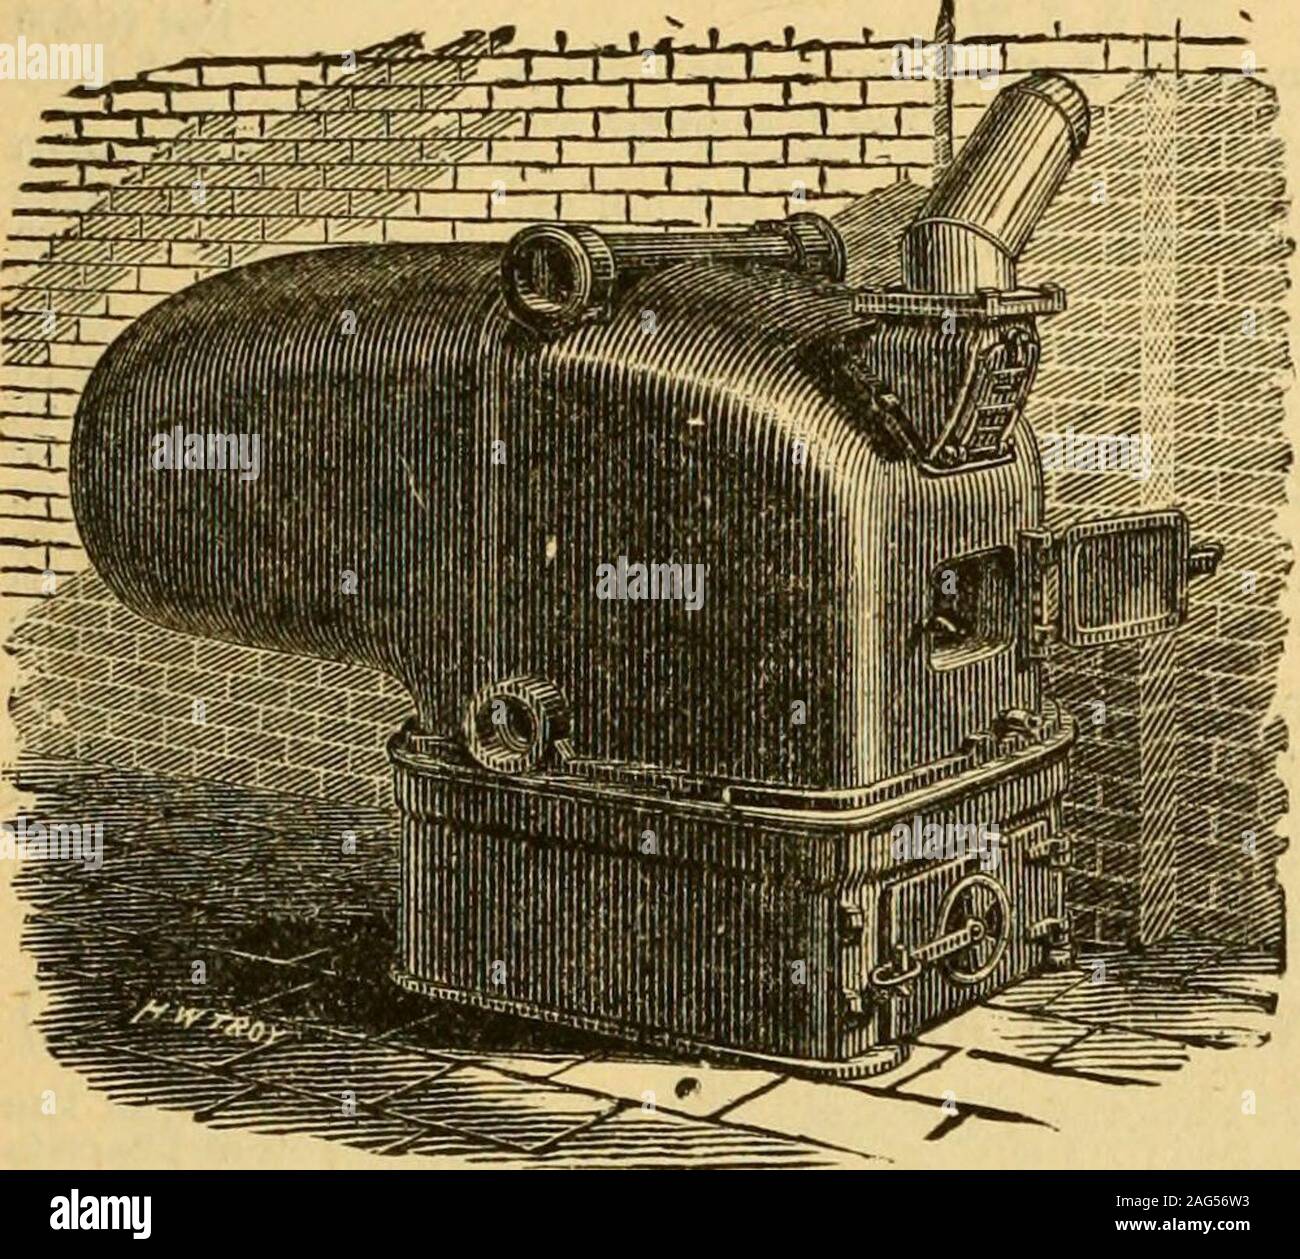 . The Gardener's monthly and horticulturist. HITCHINGS & CO., [Established, 1844.] No. 233 Mercer Street, „ „.„.„. NEAR BLBECKBR STREET, Bate-BurnIng Water Heater Threesizes. Patented, 1873. METlAf V^^DI^. FOUR PATTERNS OF BOILERS -EIGHTEEN SIZES- HEATING PIPES, EXPANSION TANKS, STOP-VALVES AND PIPE FITTINGS IN GREAT VARIETY AND AT Gorrngated Fire-box Boiler. T /^ ^lU IPTP T^^ h ^-^ Five sizes. Patented, 1867. New Patterns, 1873. -I—JV^ VV ..C^ J-J.±..^ I* IK7&gt; Stock Photo